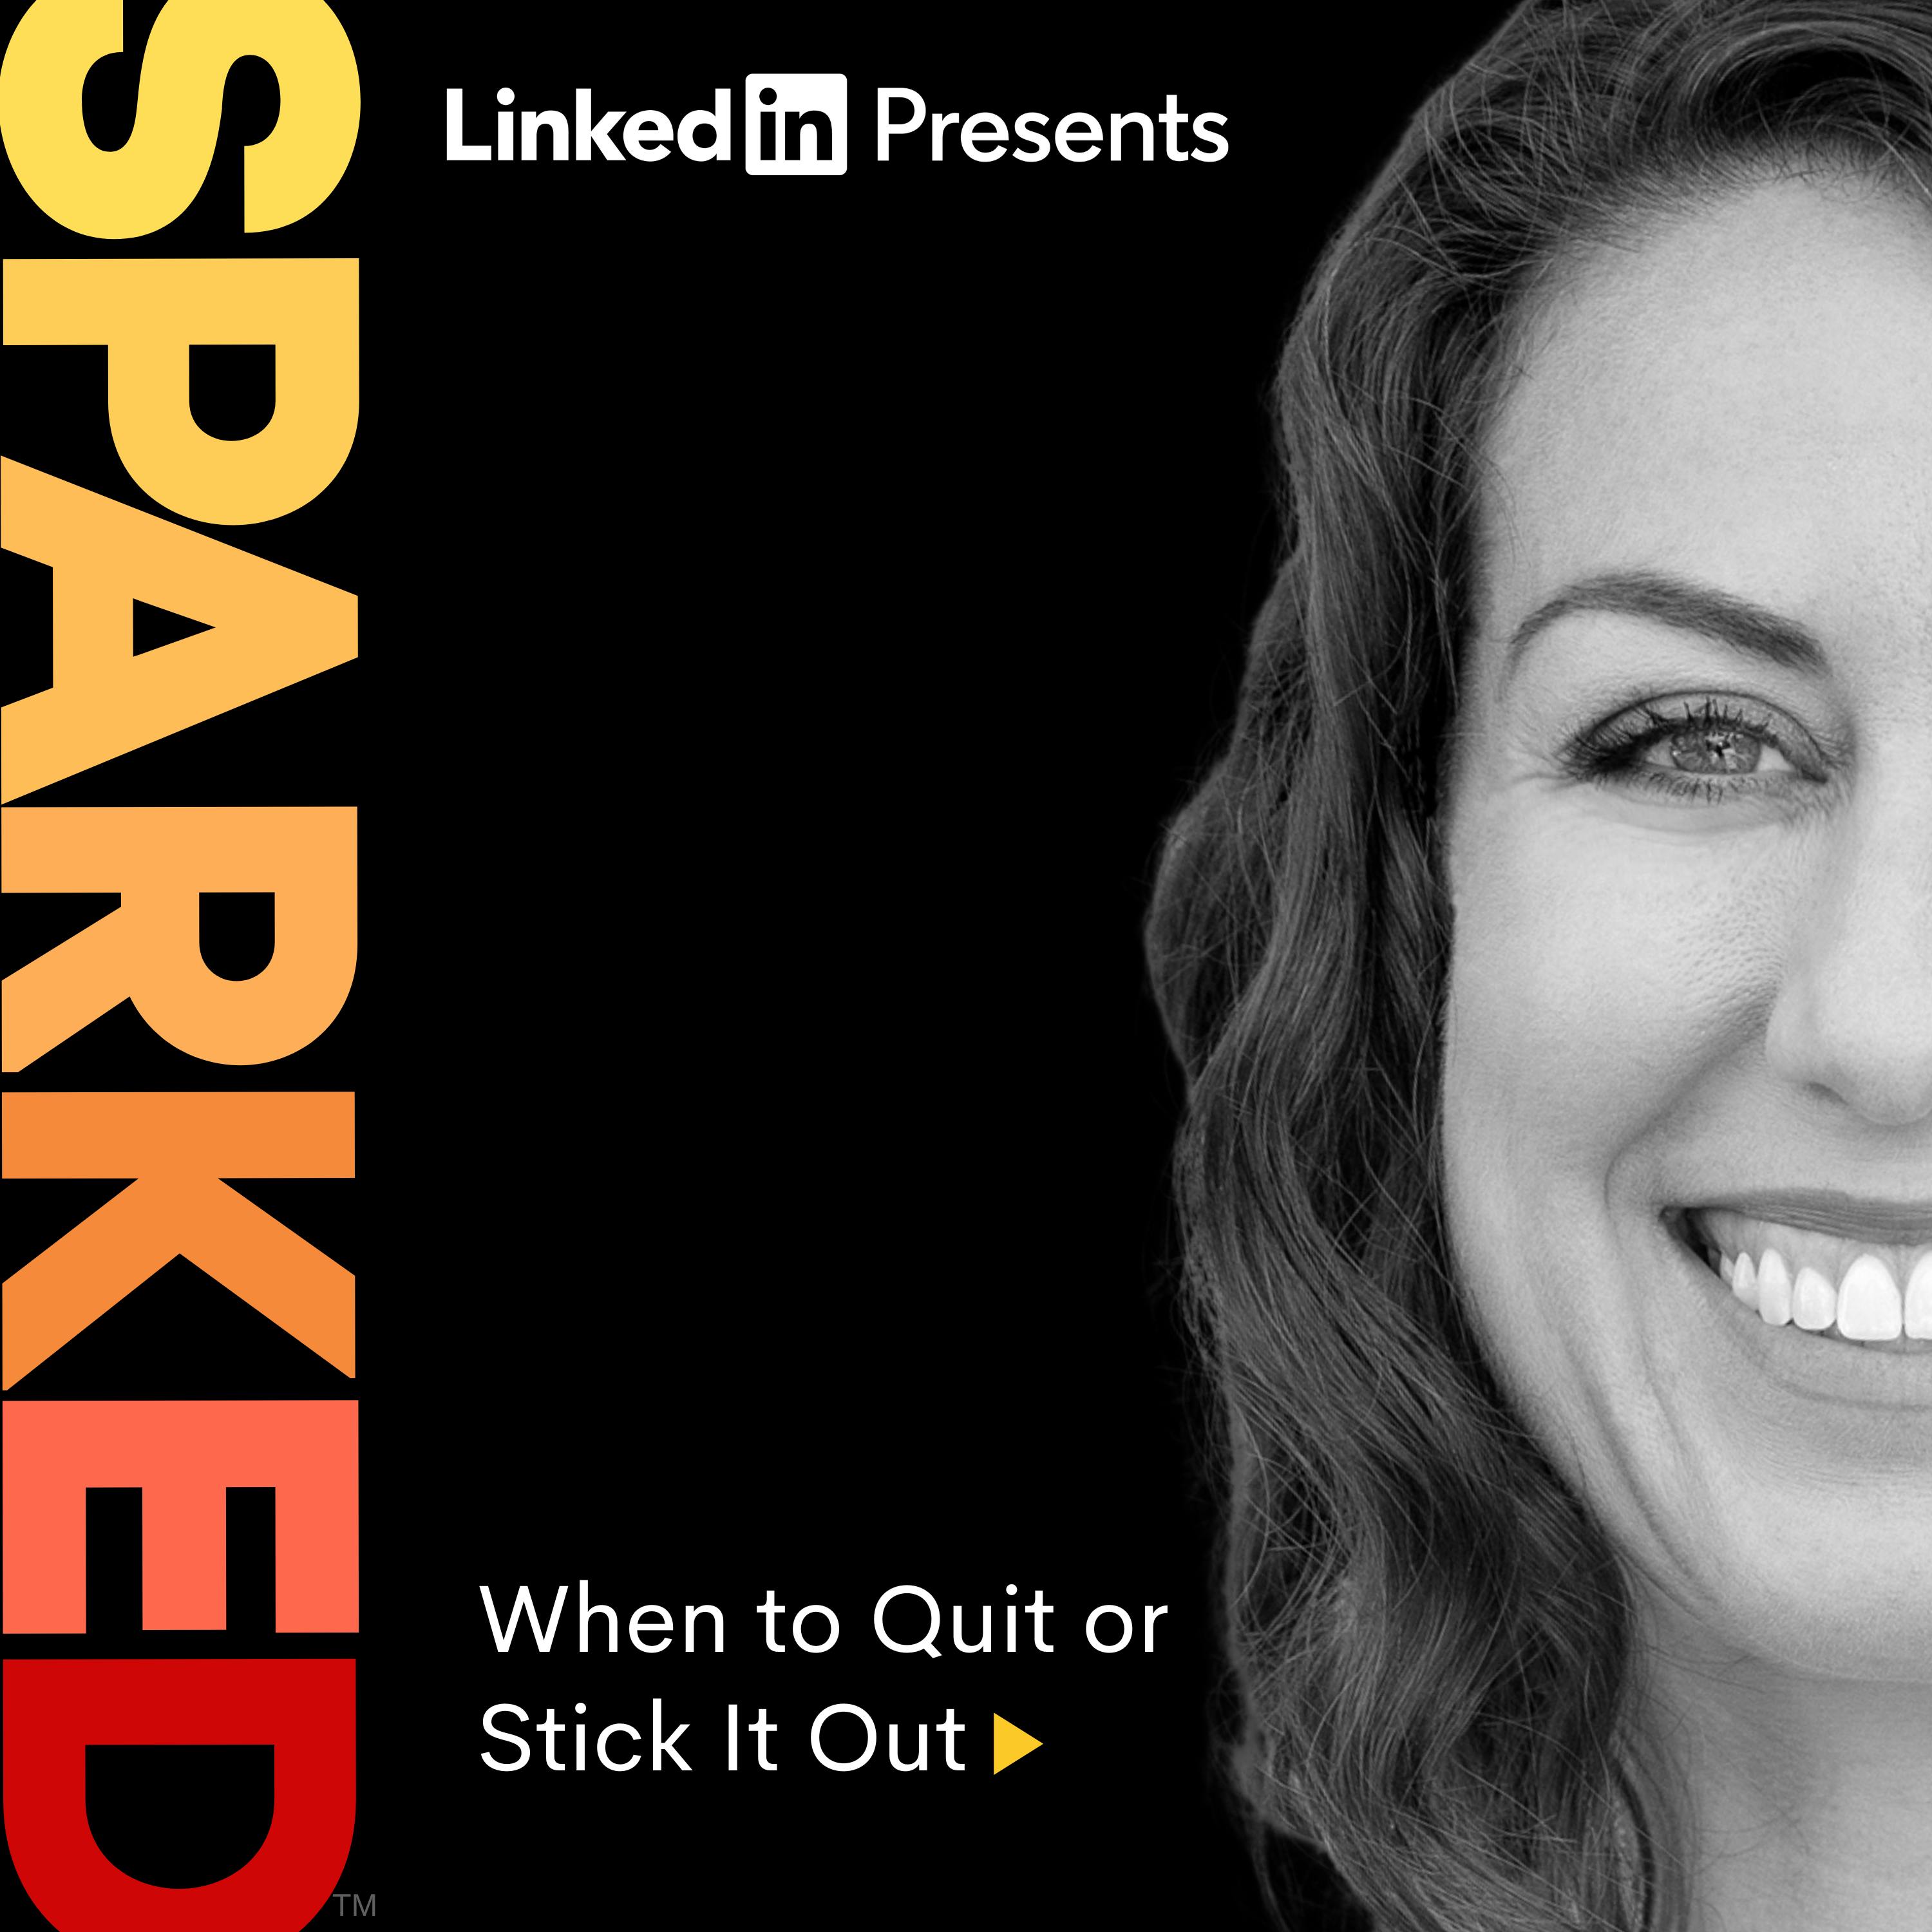 When to Quit or Stick It Out